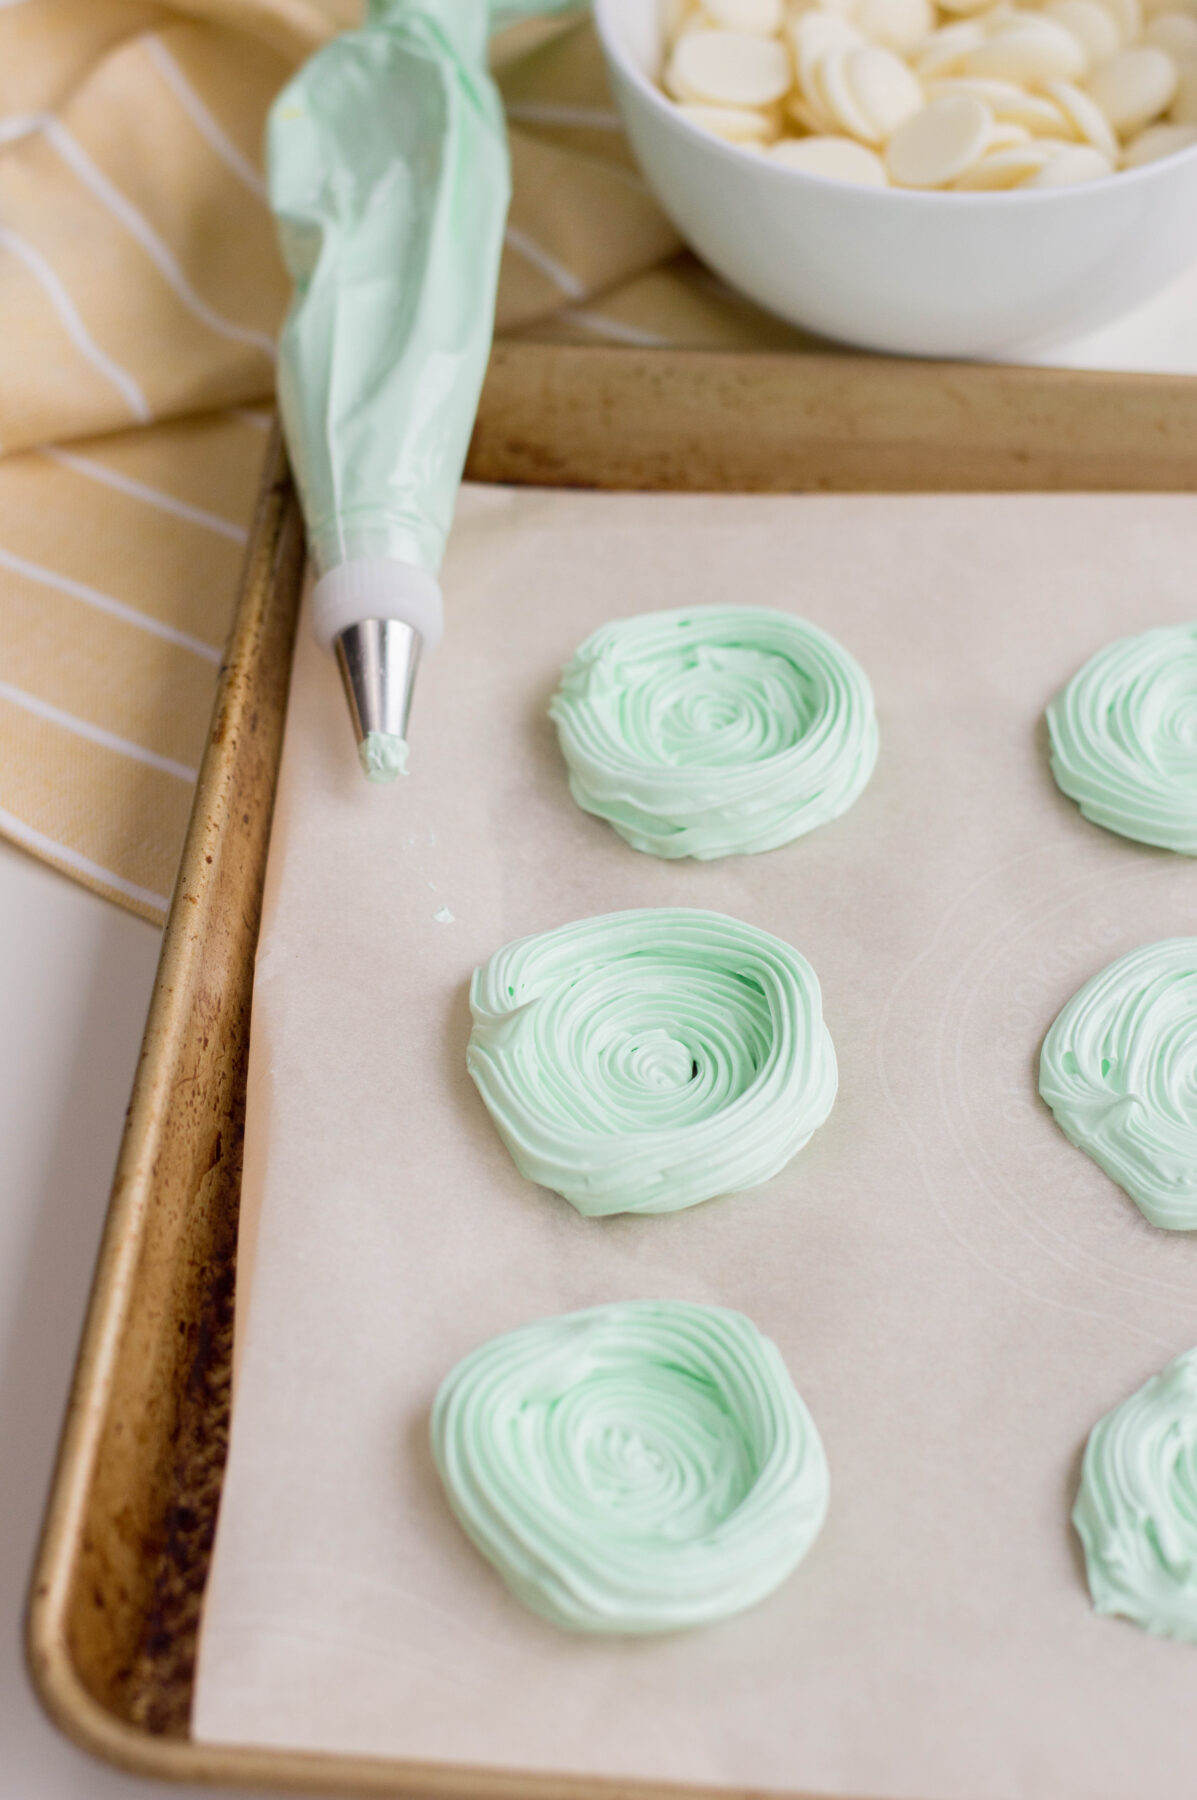 "nests" made with a circle of meringue piped around the outer edge of the meringue circles,